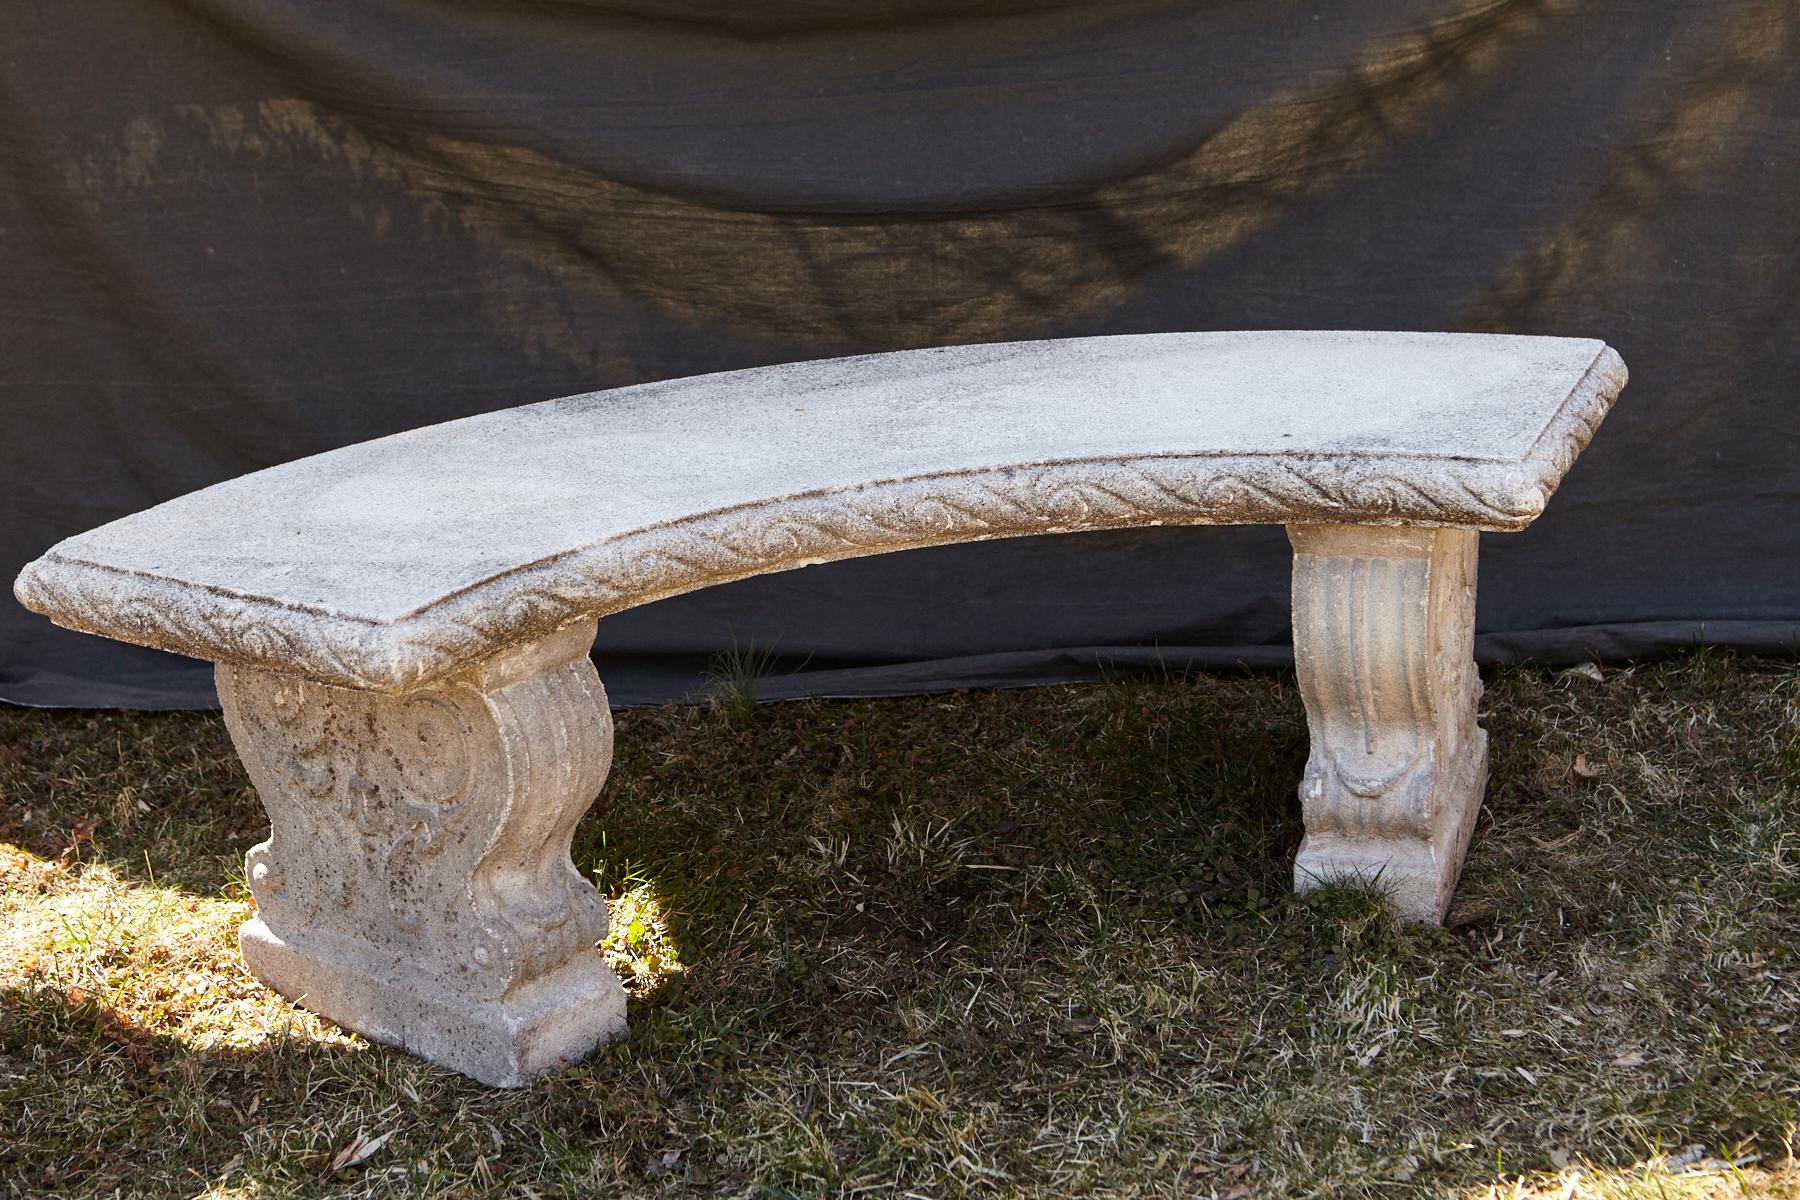 Curved cast stone bench with an ornamental carved band of alternating concave and convex sections around the flat seat, reminiscent of waves, mounted on carved legs with carved double sided scrolled ornaments and leaves.
The bench has a very nice